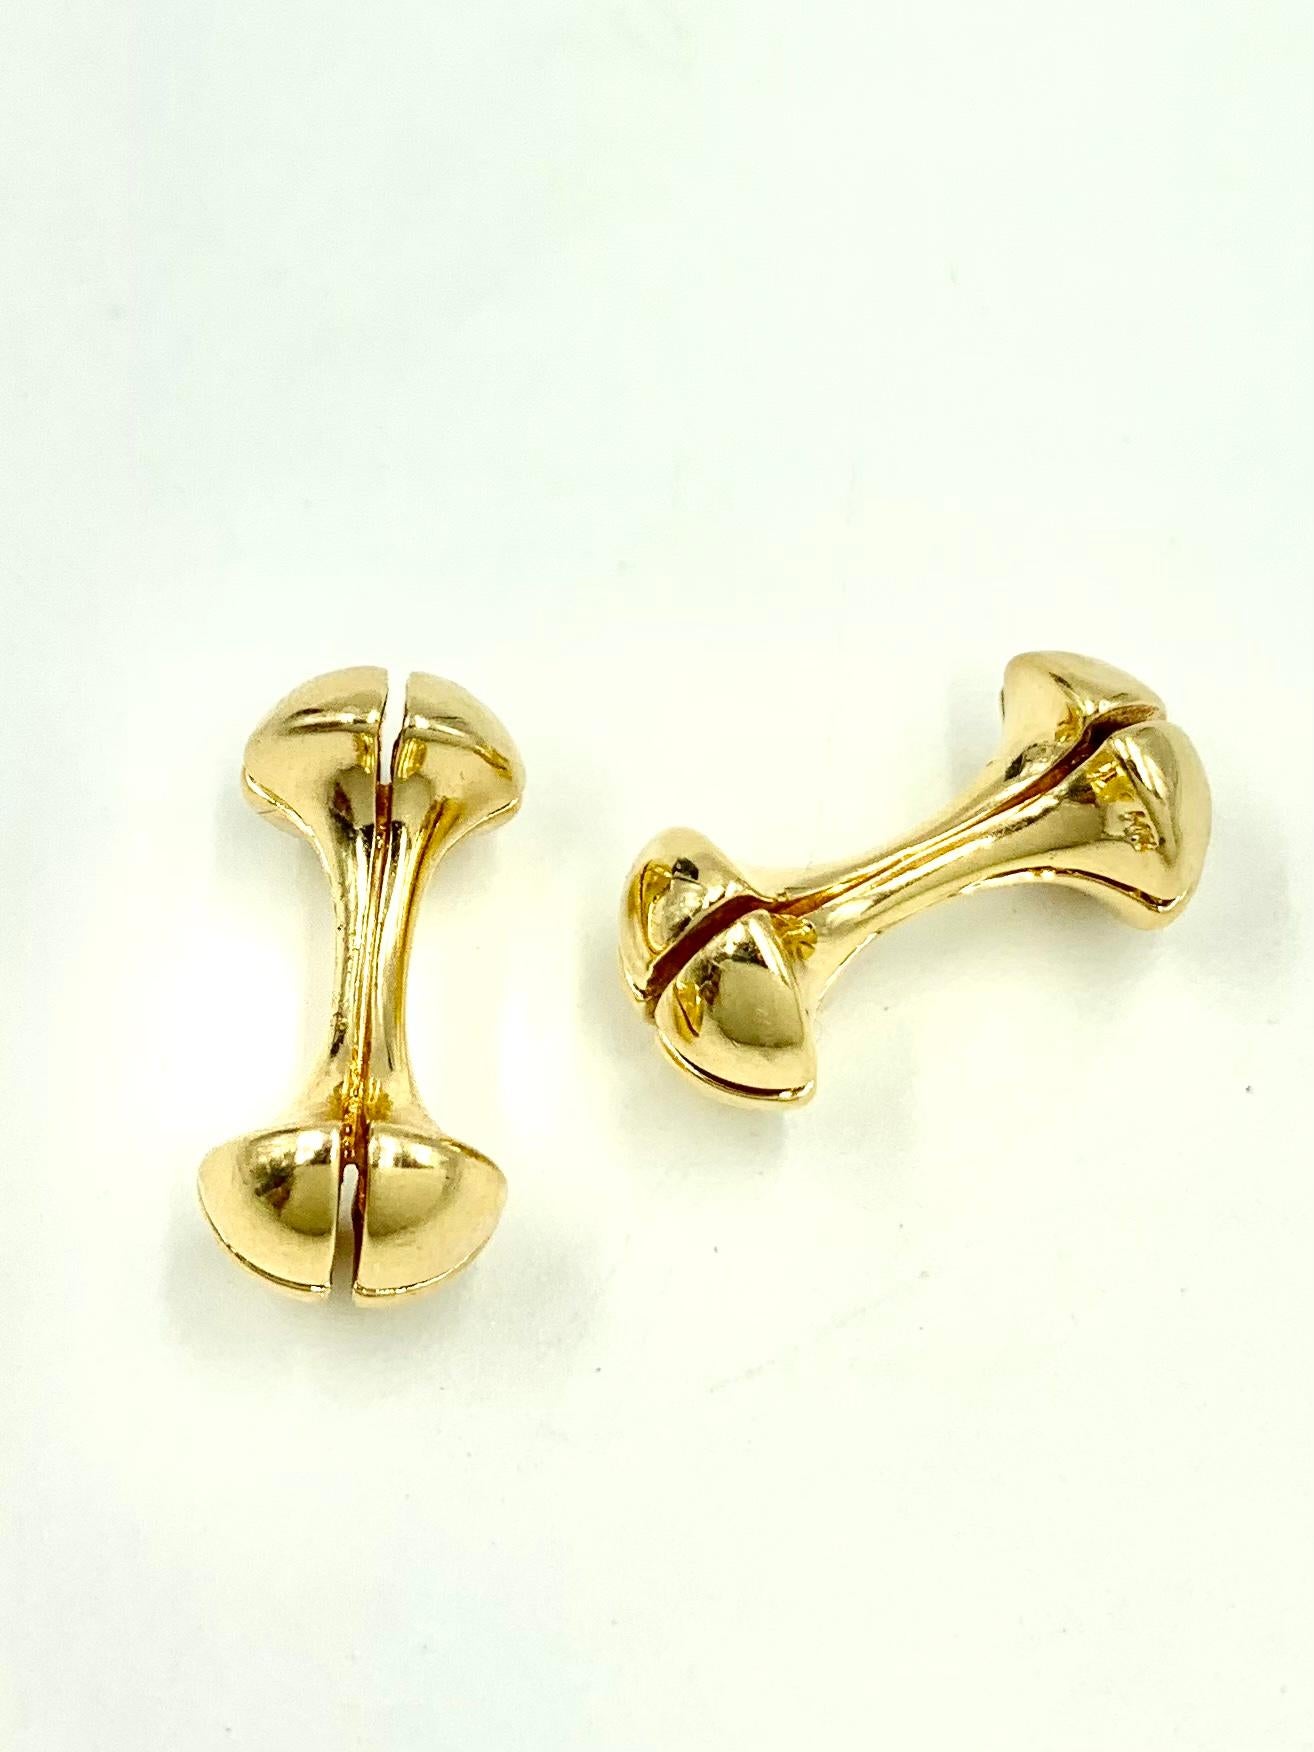 Vintage MCM Vis a Tete Cruciforme Screw 14K Heavy Solid Yellow Gold Cufflinks For Sale 1